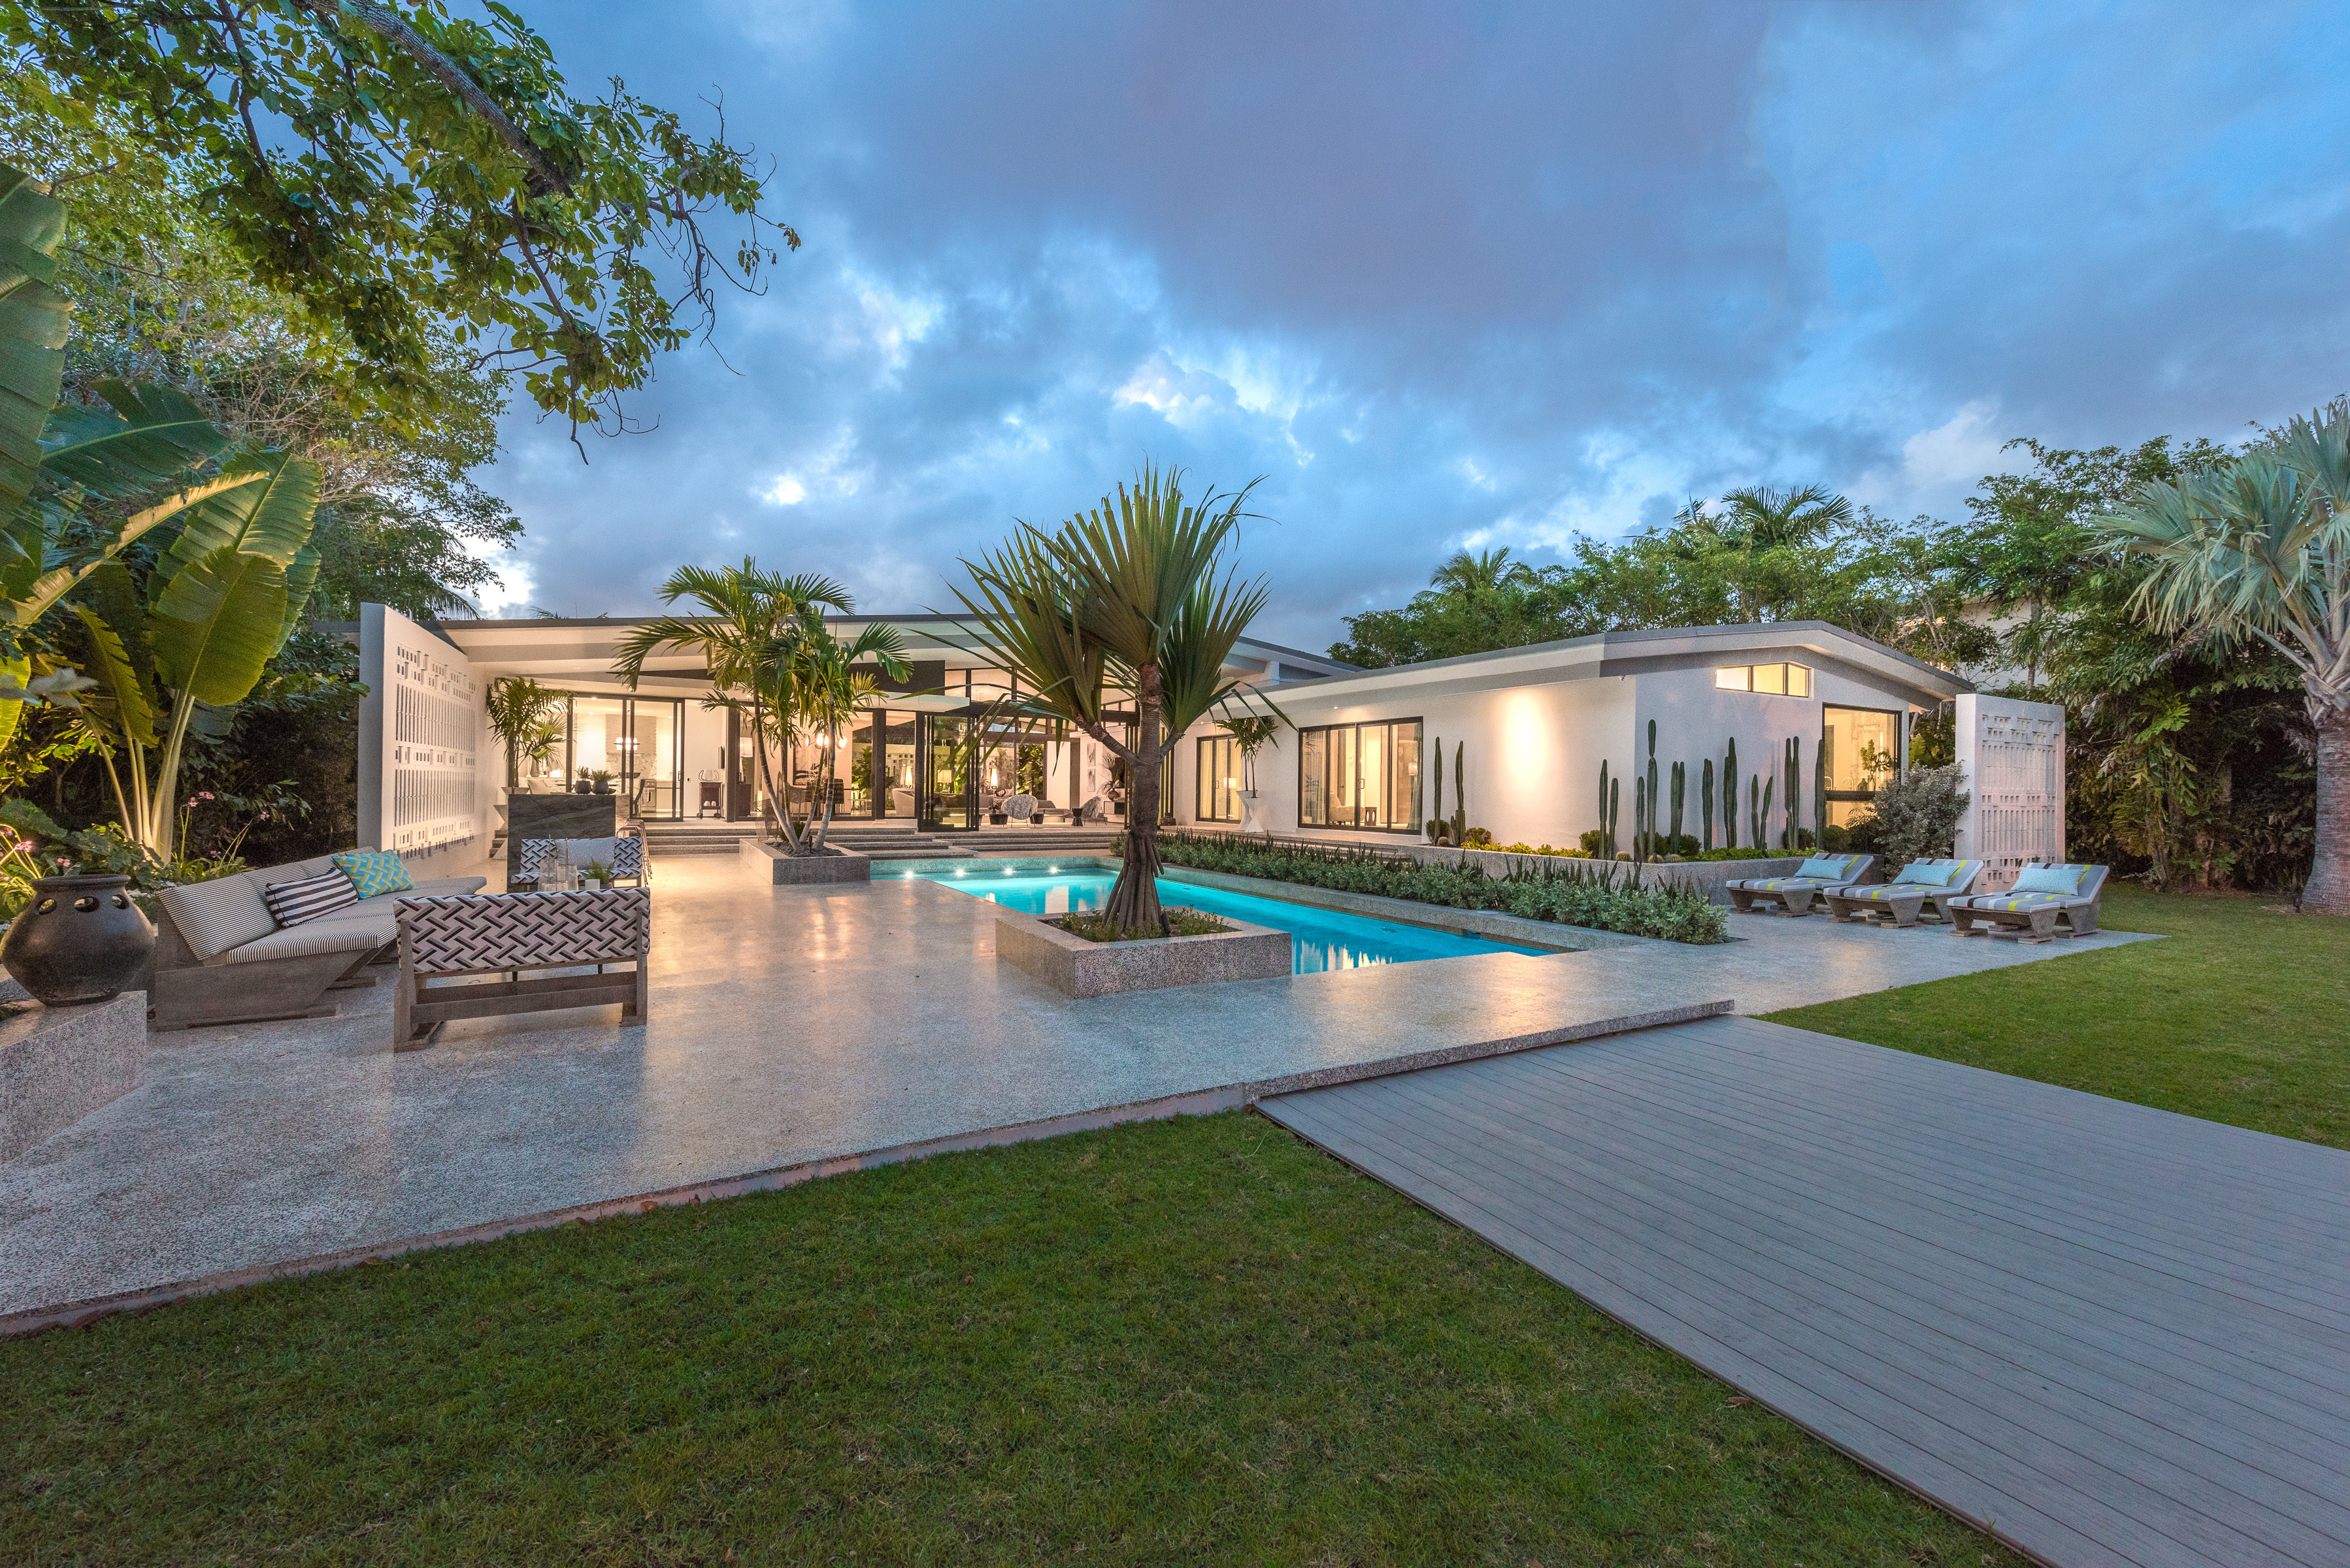 Backyard view of a midcentury modern home in Miami Beach designed by a famous french architect, with large glass windows.